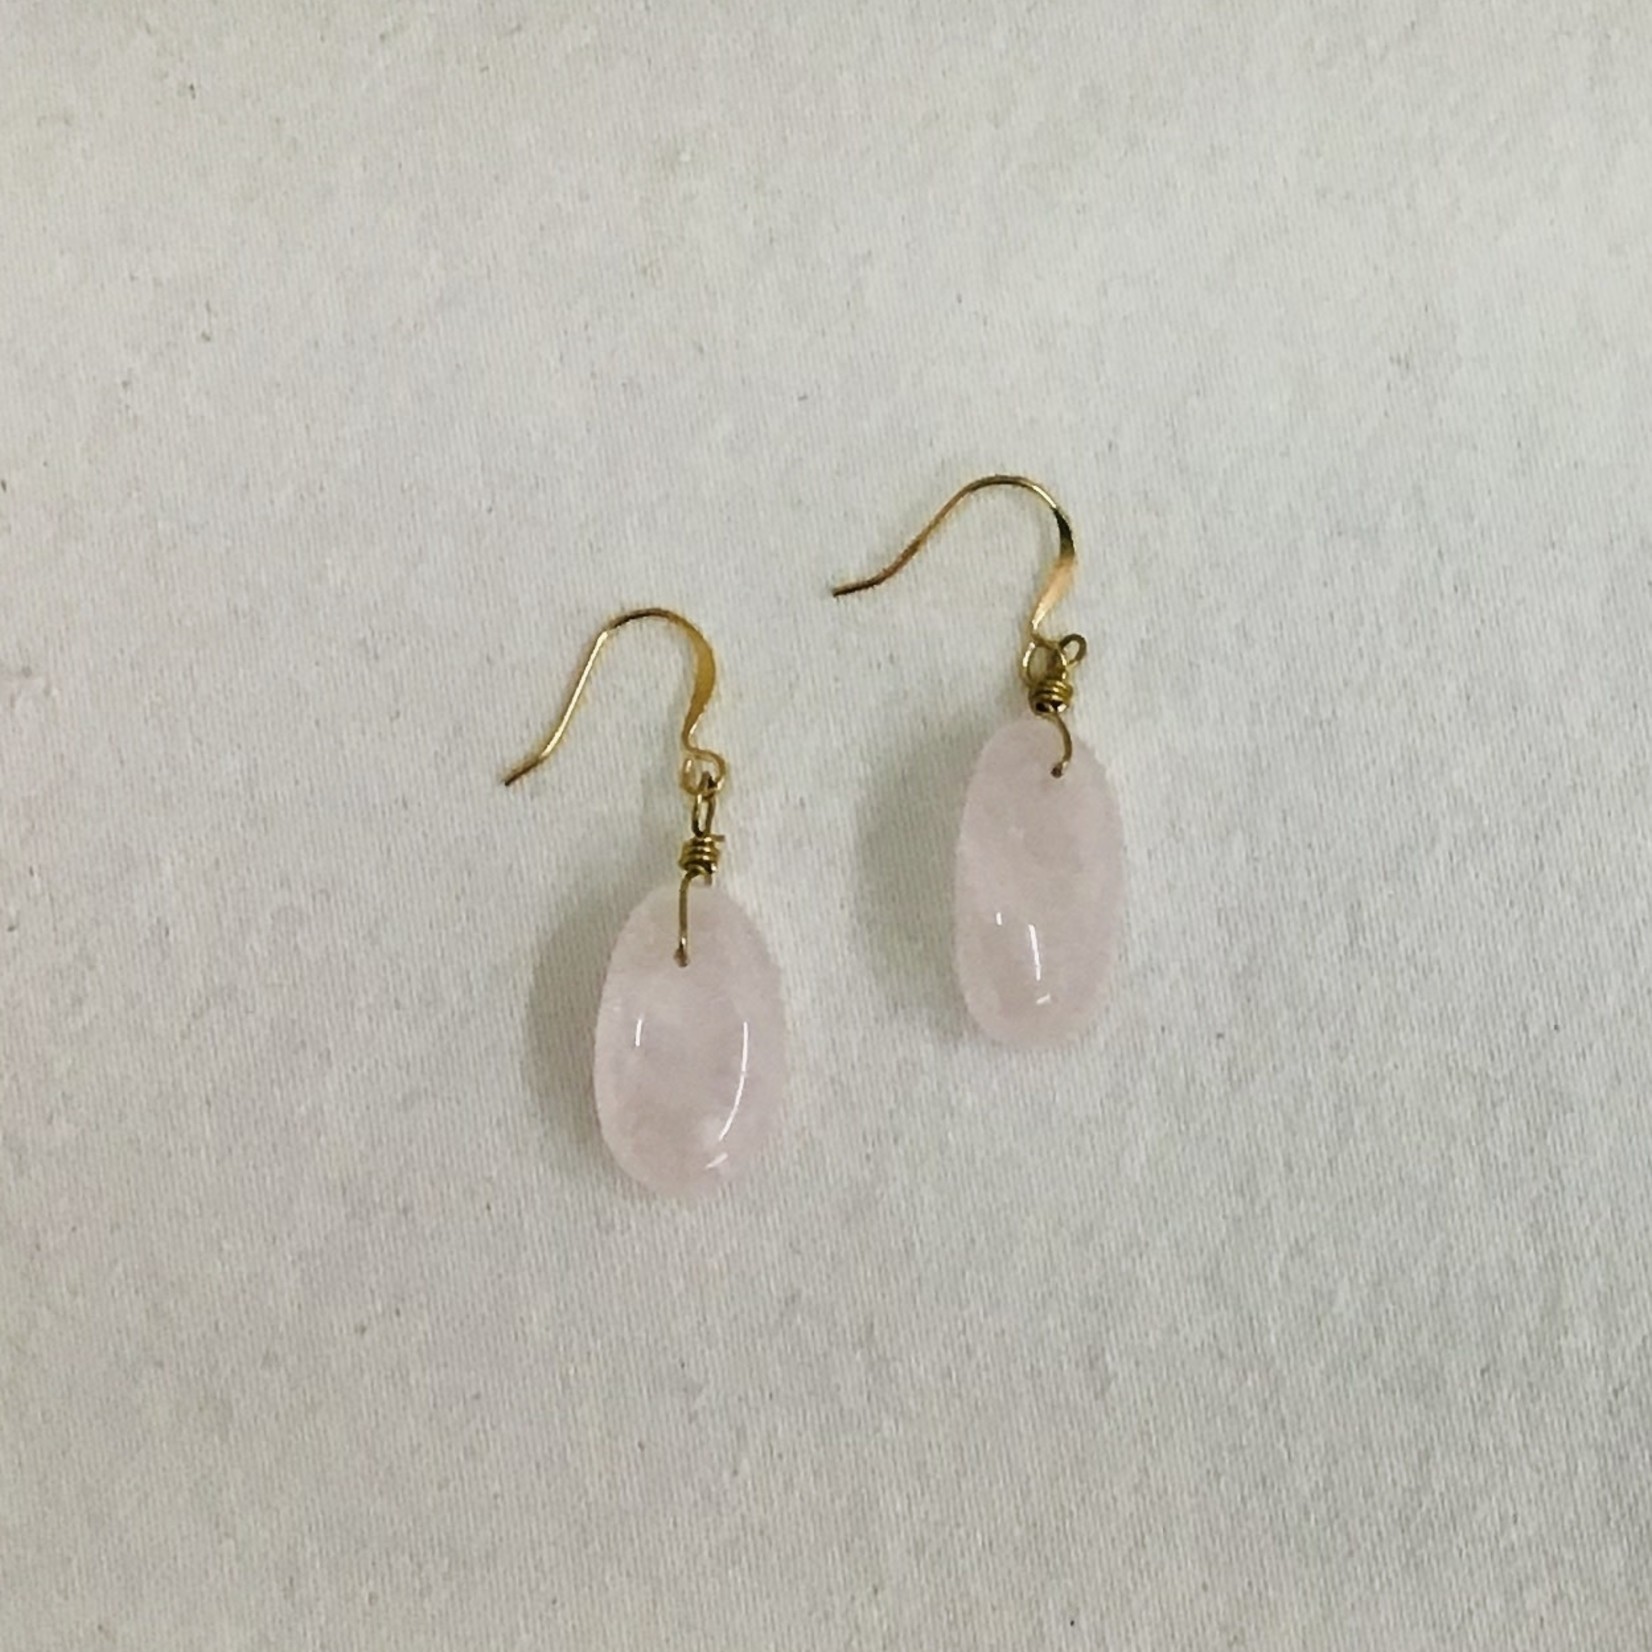 Ten Thousand Villages Tickled Pink Stone Earrings